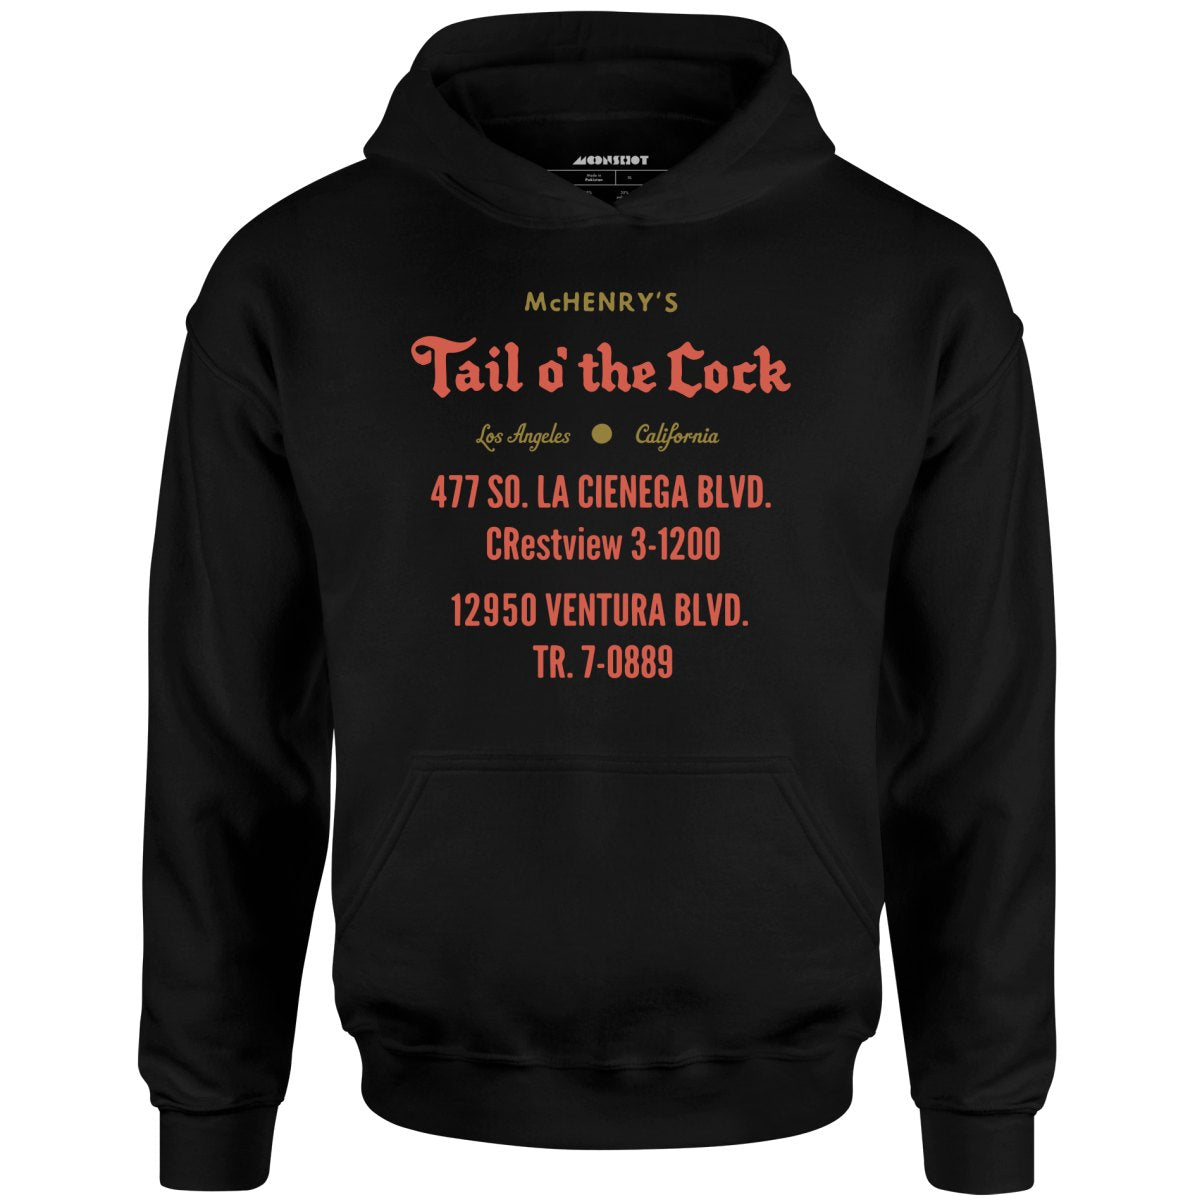 McHenry's Tail o' the Cock - Los Angeles, CA - Vintage Restaurant - Unisex Hoodie